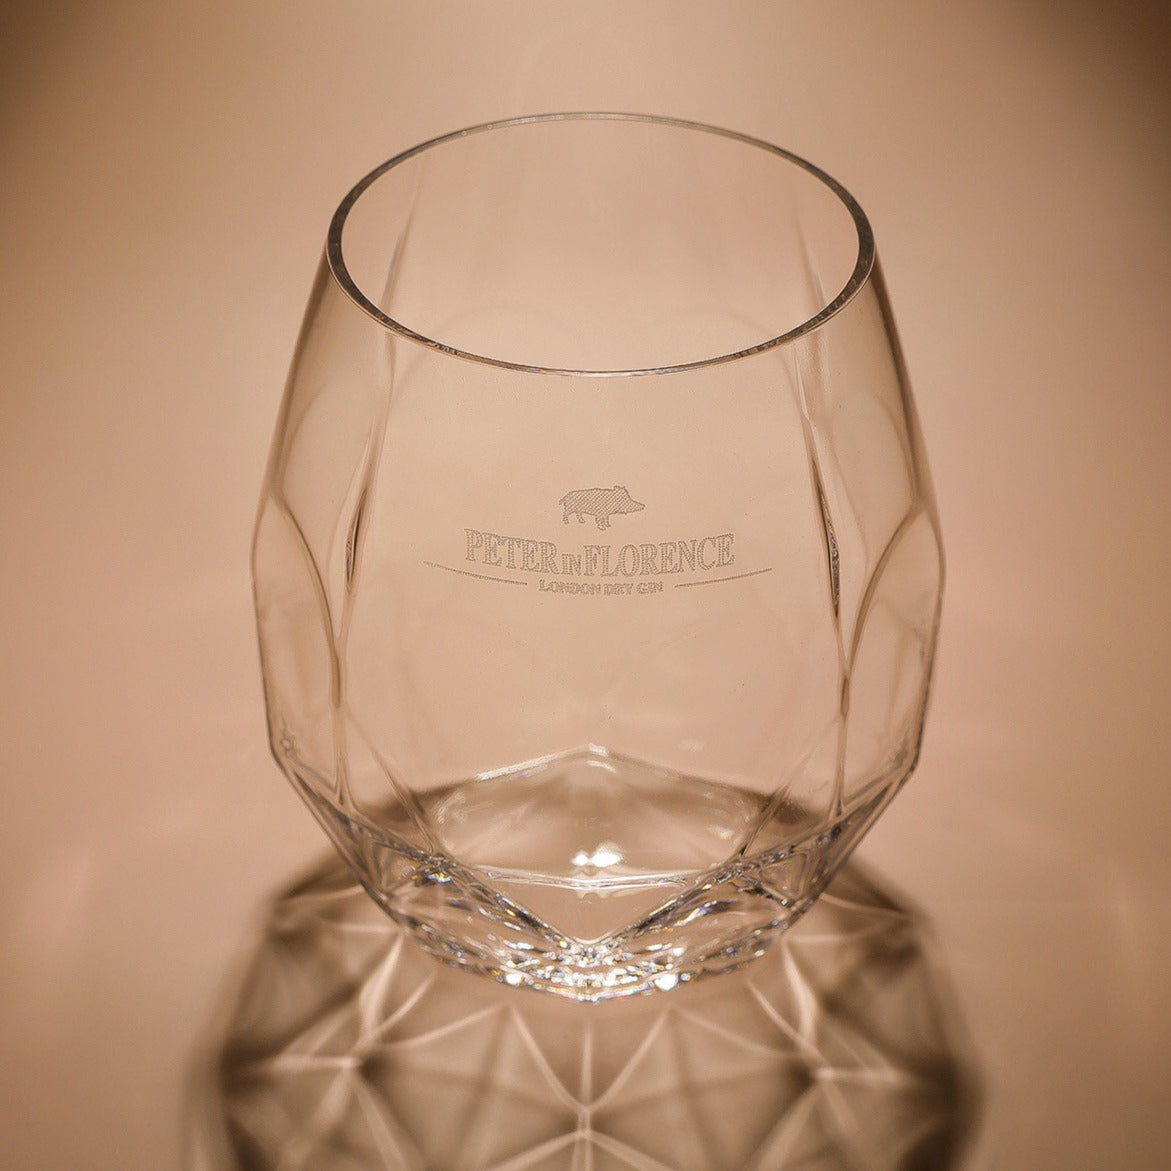 Peter Cocktail Glass